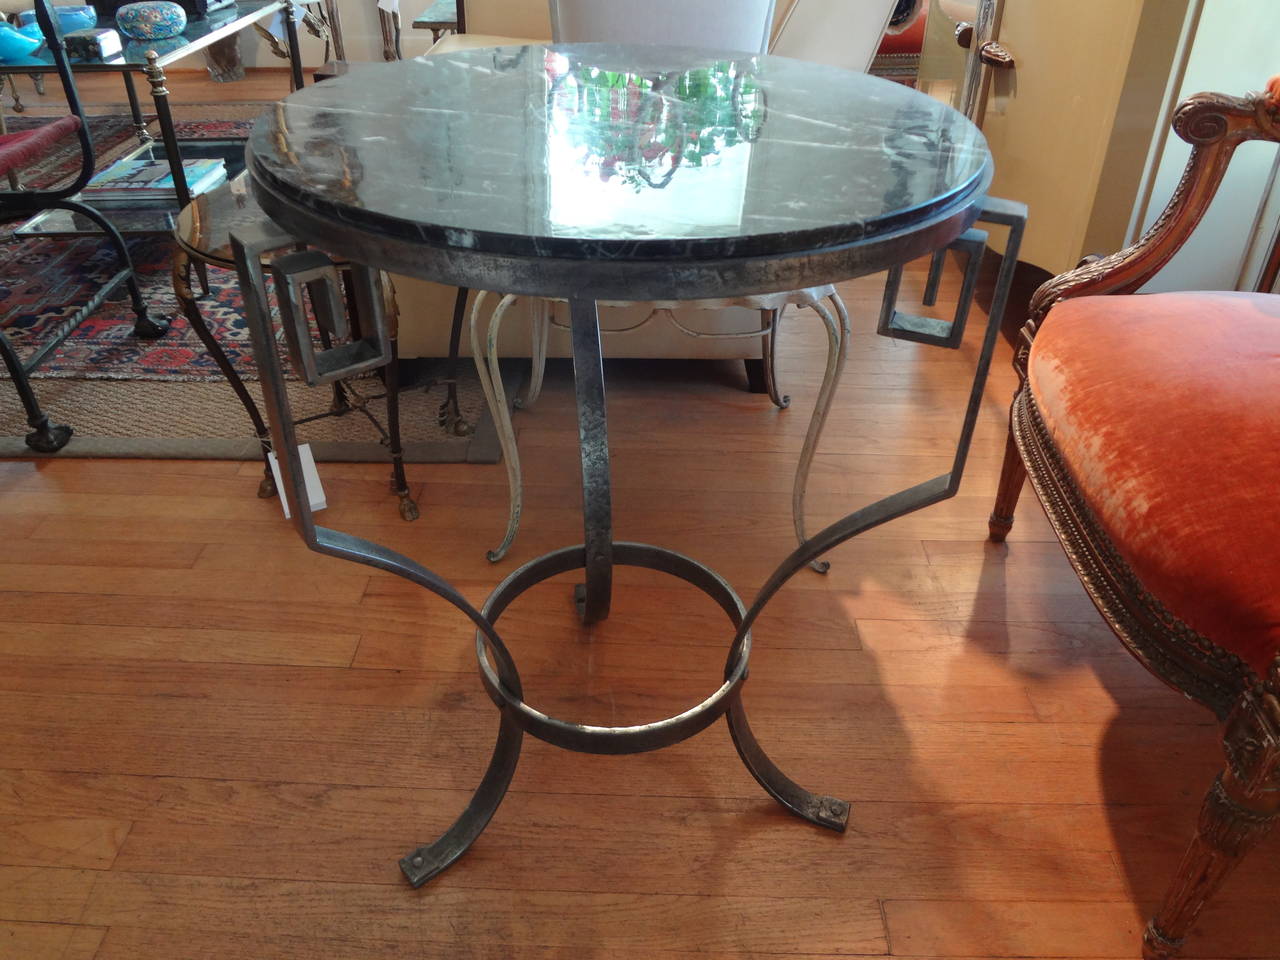 Chic French Neoclassical style steel table with Greek key design and marble top.

Please click KIRBY ANTIQUES logo below to view additional pieces from our vast inventory.